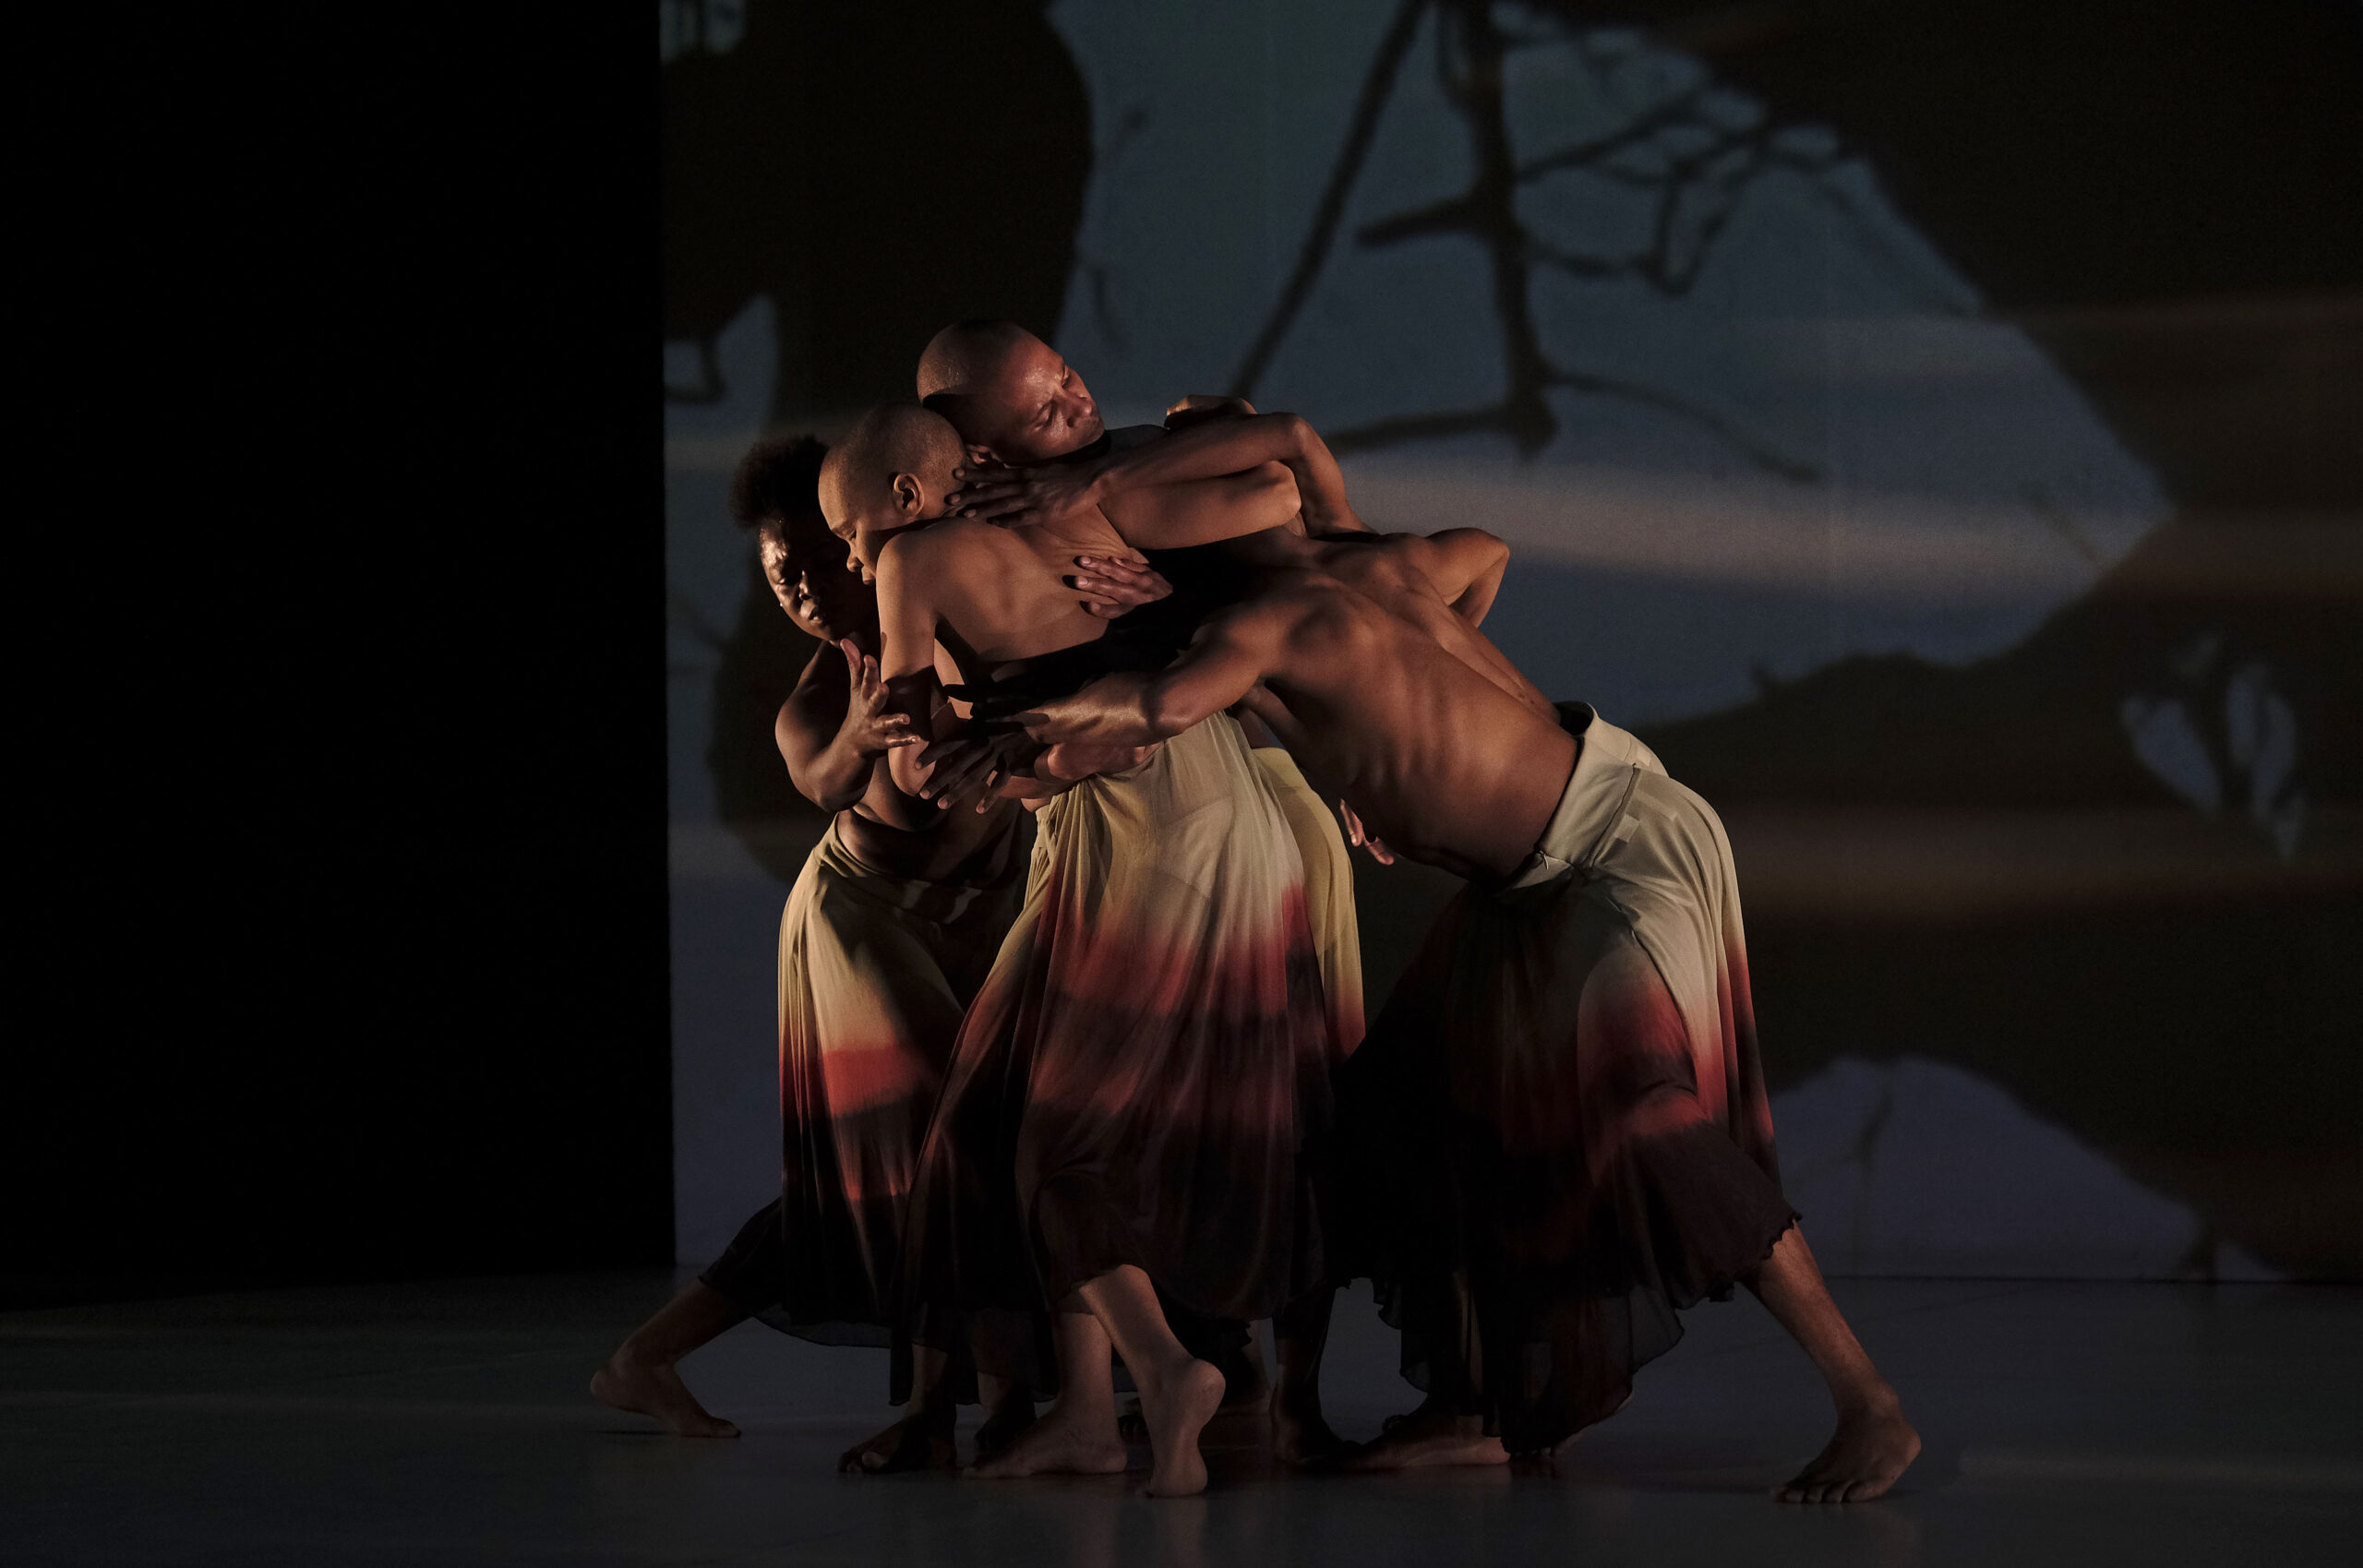 A small group of Black dancers, all shirtless and wearing calf-length skirts that fade from white to deep red, cluster together. They face inward, carefully cradling necks or backs with arms and hands, a moment of care in the midst of motion. The backdrop gives the impression of trees in silhouette.